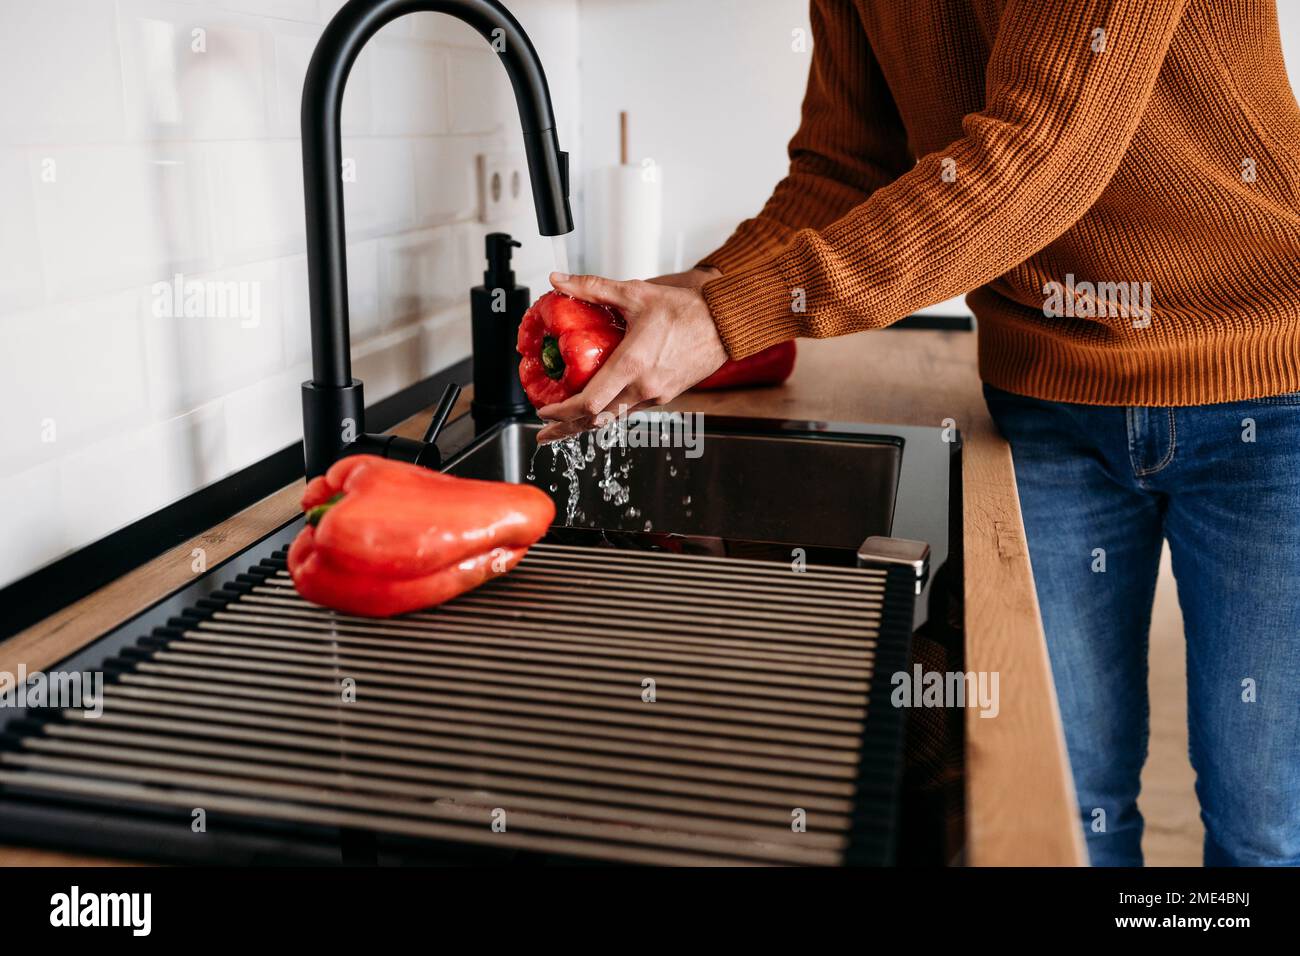 Hands of man washing red bell peppers in sink at home Stock Photo